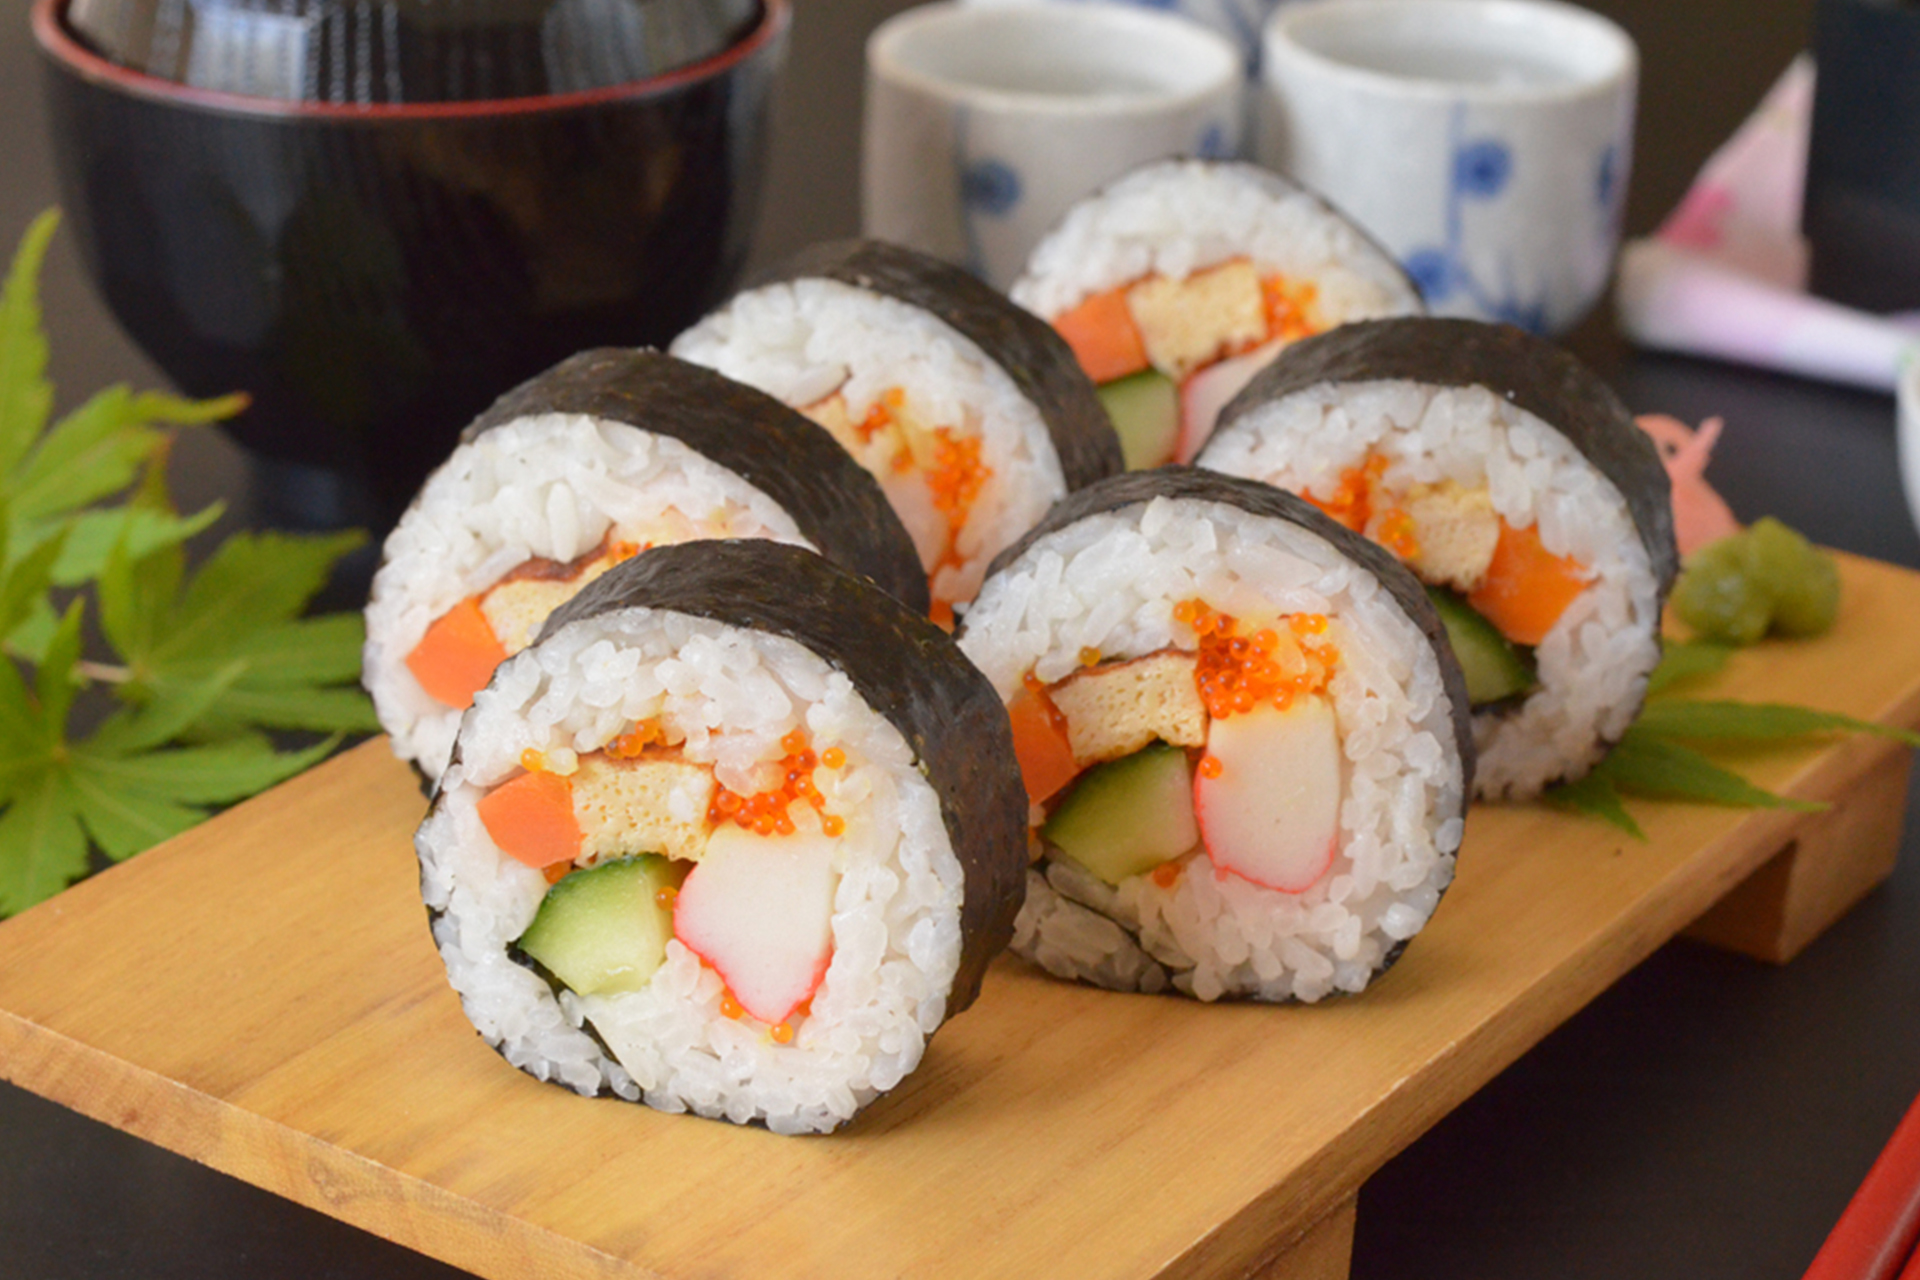 How to Roll Sushi—The Ultimate Guide « Food Hacks :: WonderHowTo